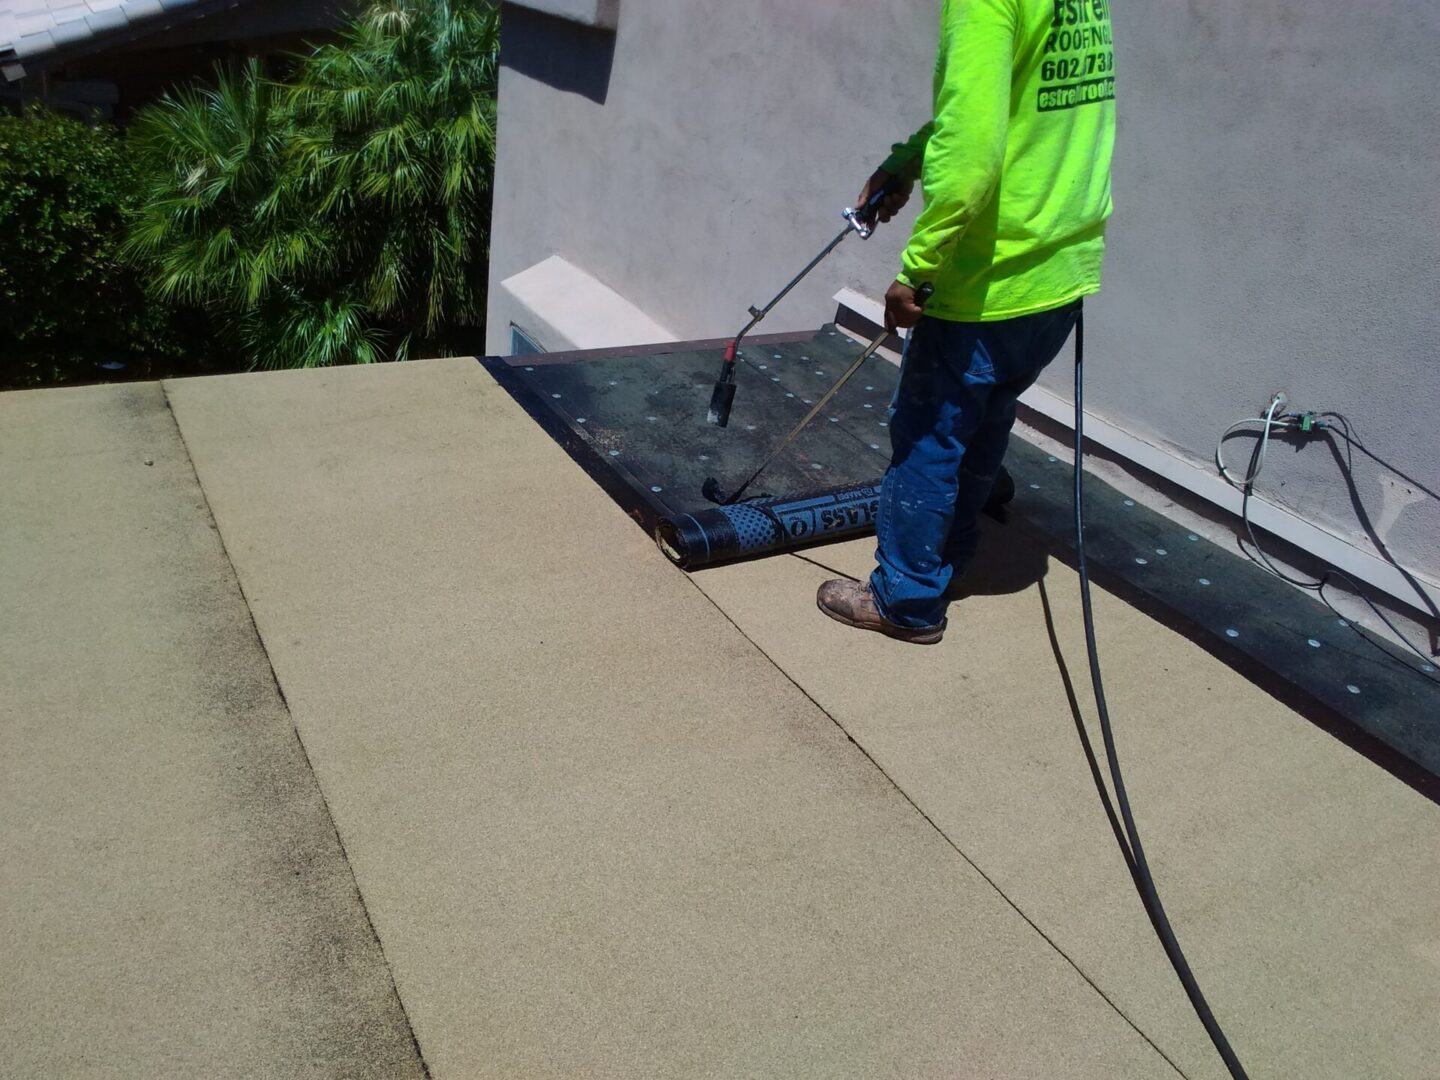 A person installing the Flat roofs on the house